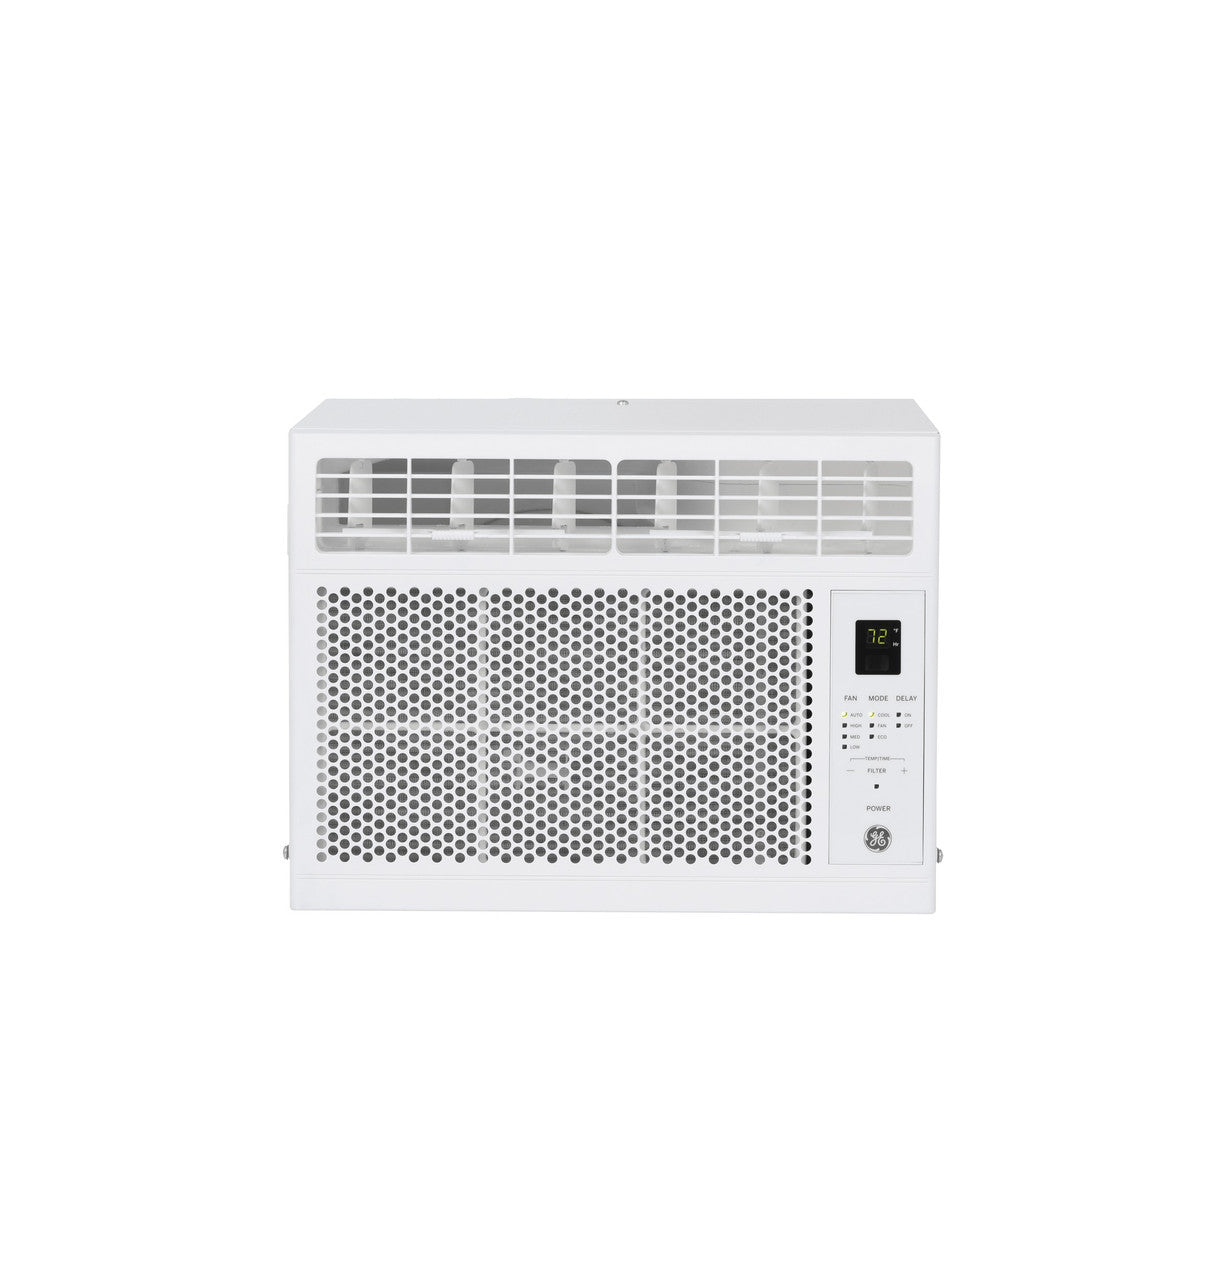 GE 6,000 BTU Electronic Window Air Conditioner for Small Rooms up to 250 sq ft. (Refurbished)